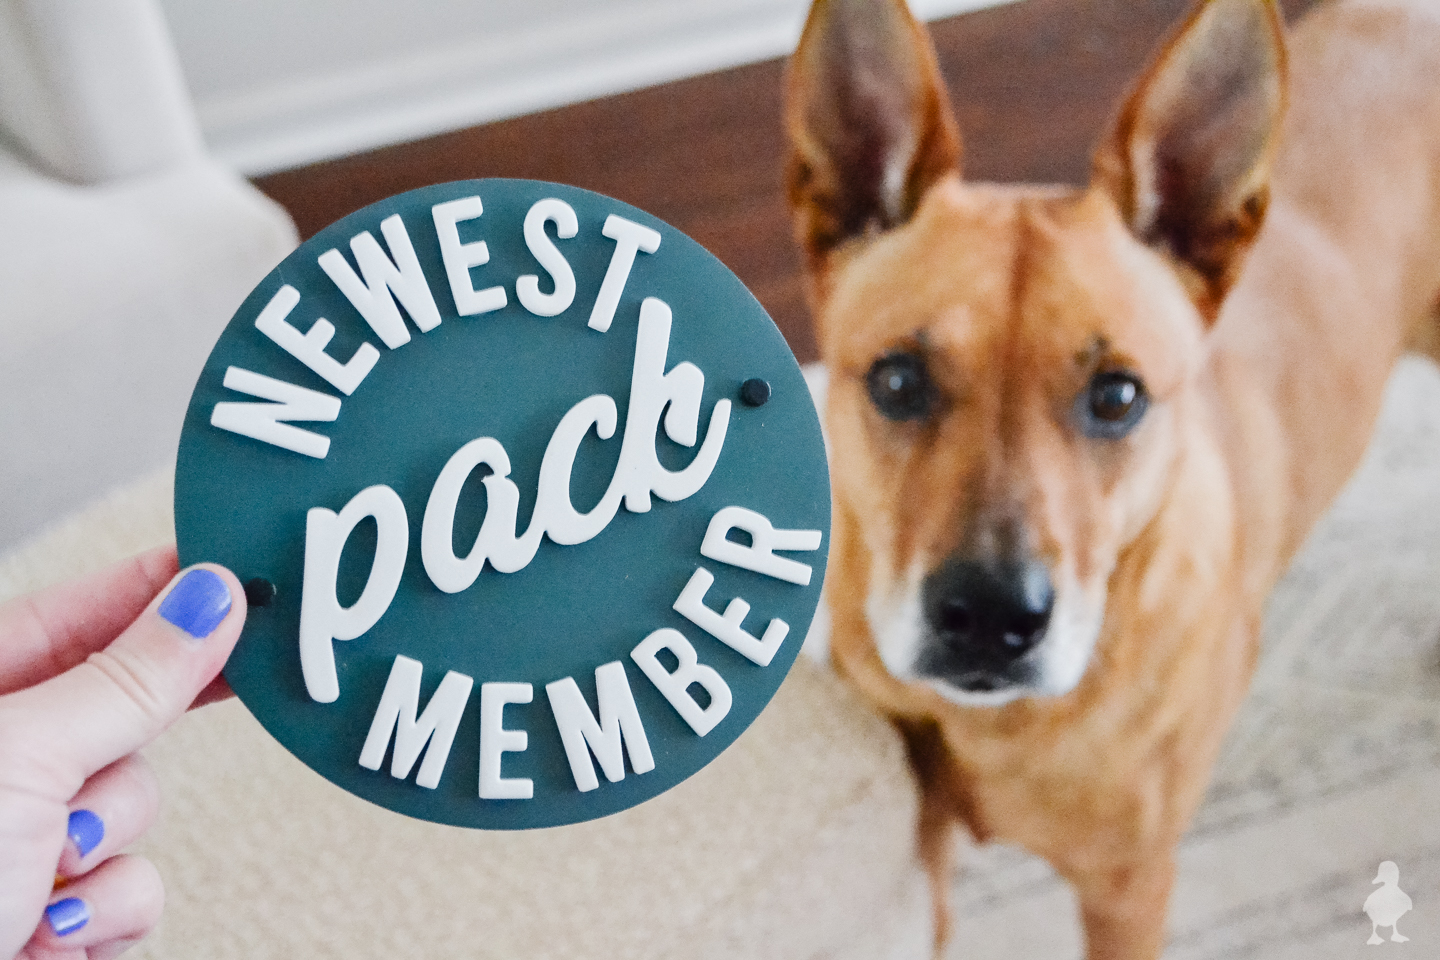 newest pack member sign with pups